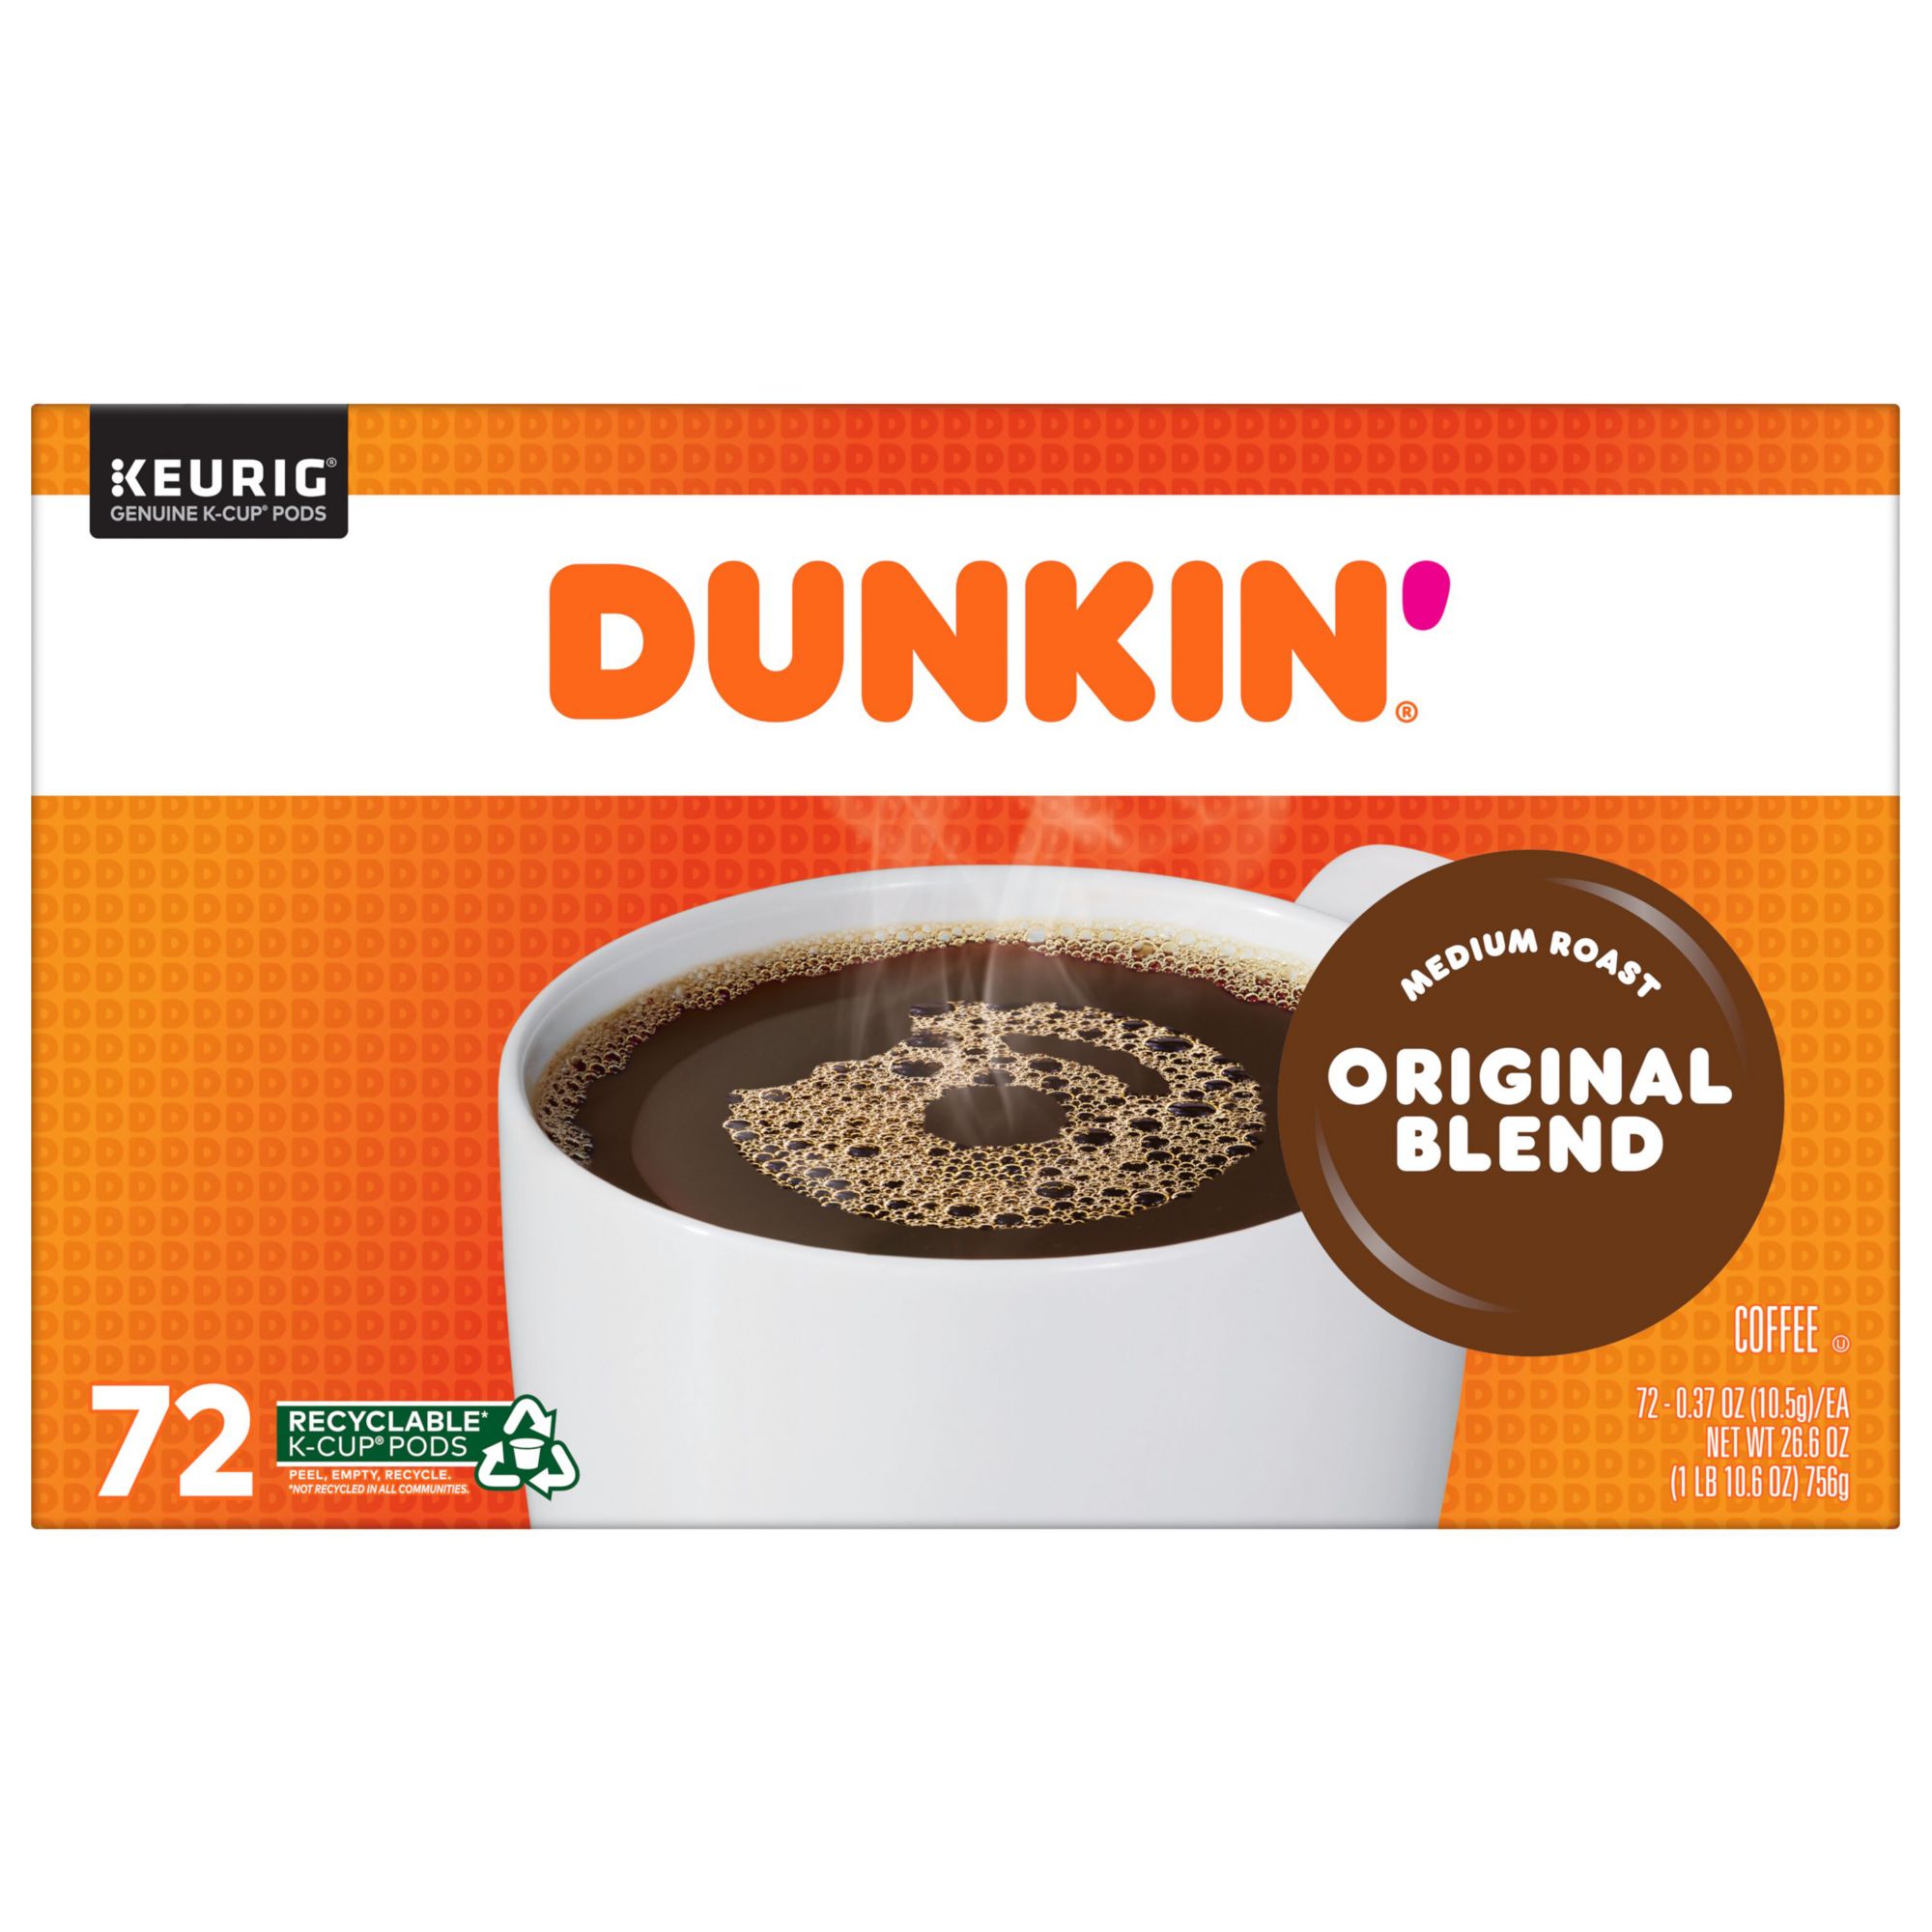 Dunkin Donuts Cold 10-Pack Single Serve Brew Cups